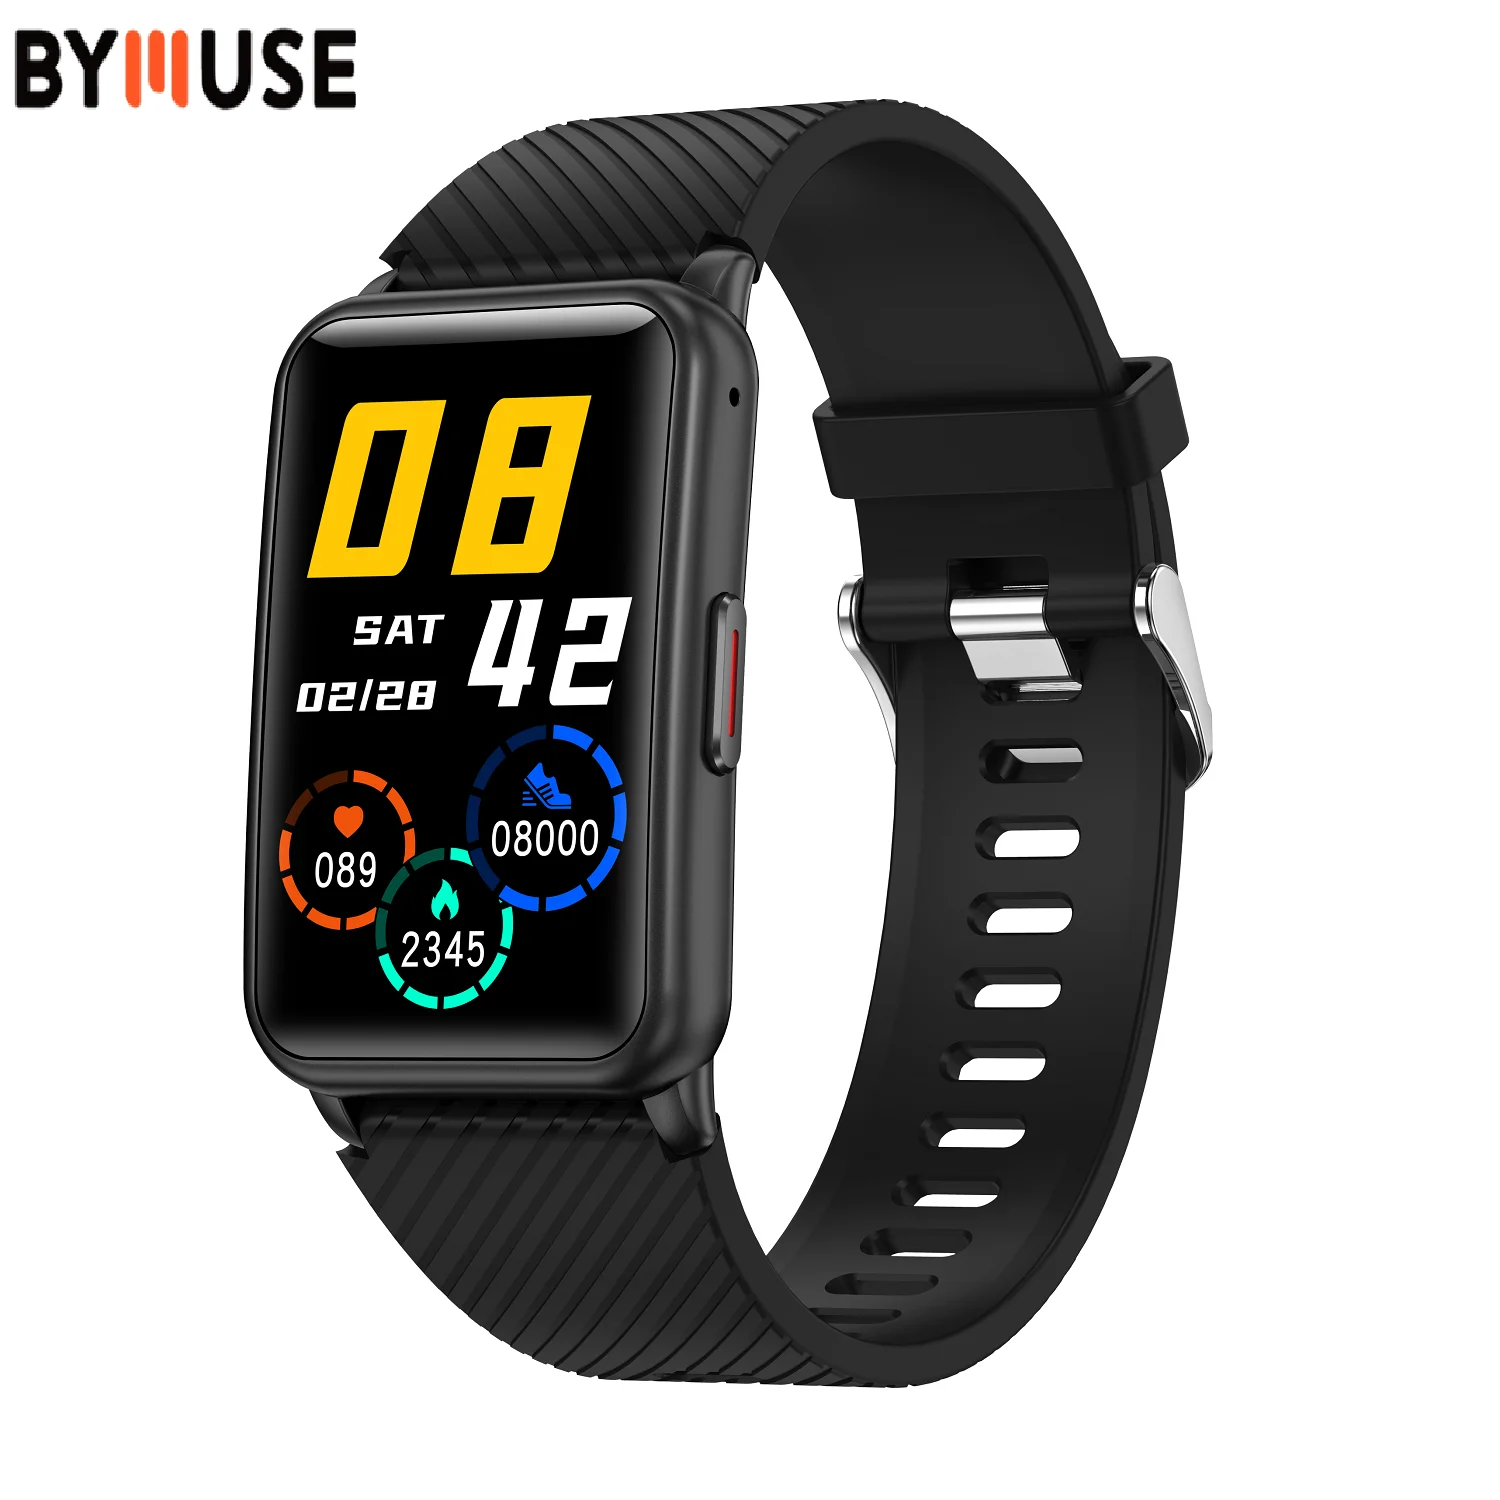 

BYMUSE H96 Smart watch Men 1.57inch Color Screen Waterproof IP67 Whatsapp Message Reminder Activity Tracker for IOS Android